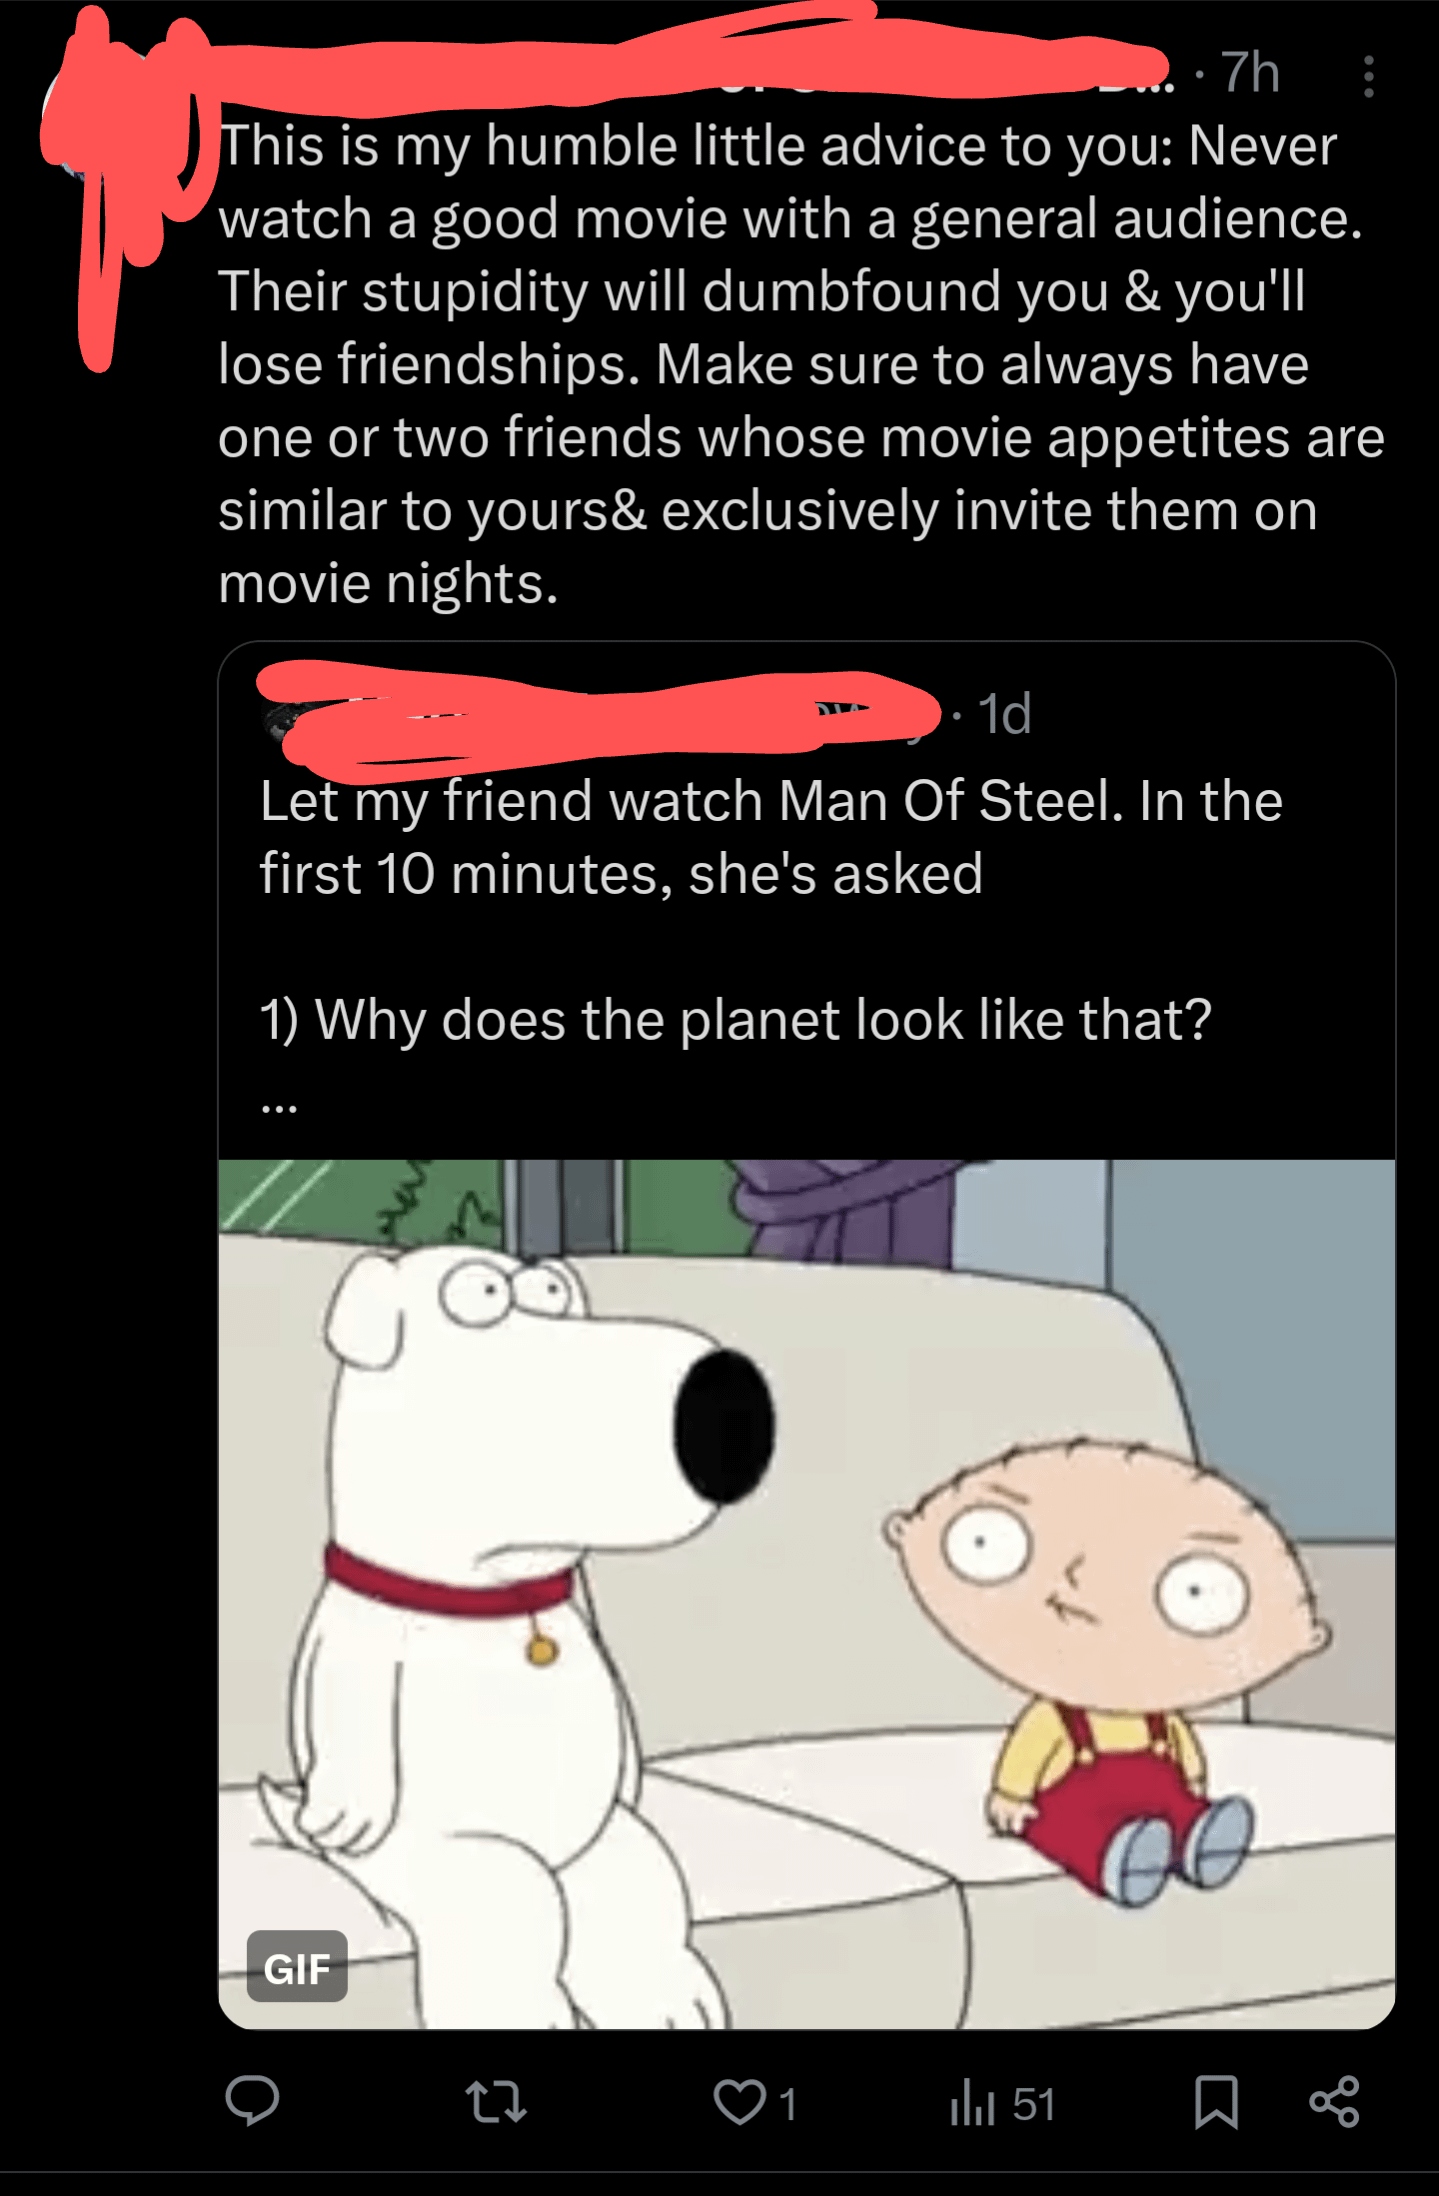 Only intelligent people can enjoy a good movie